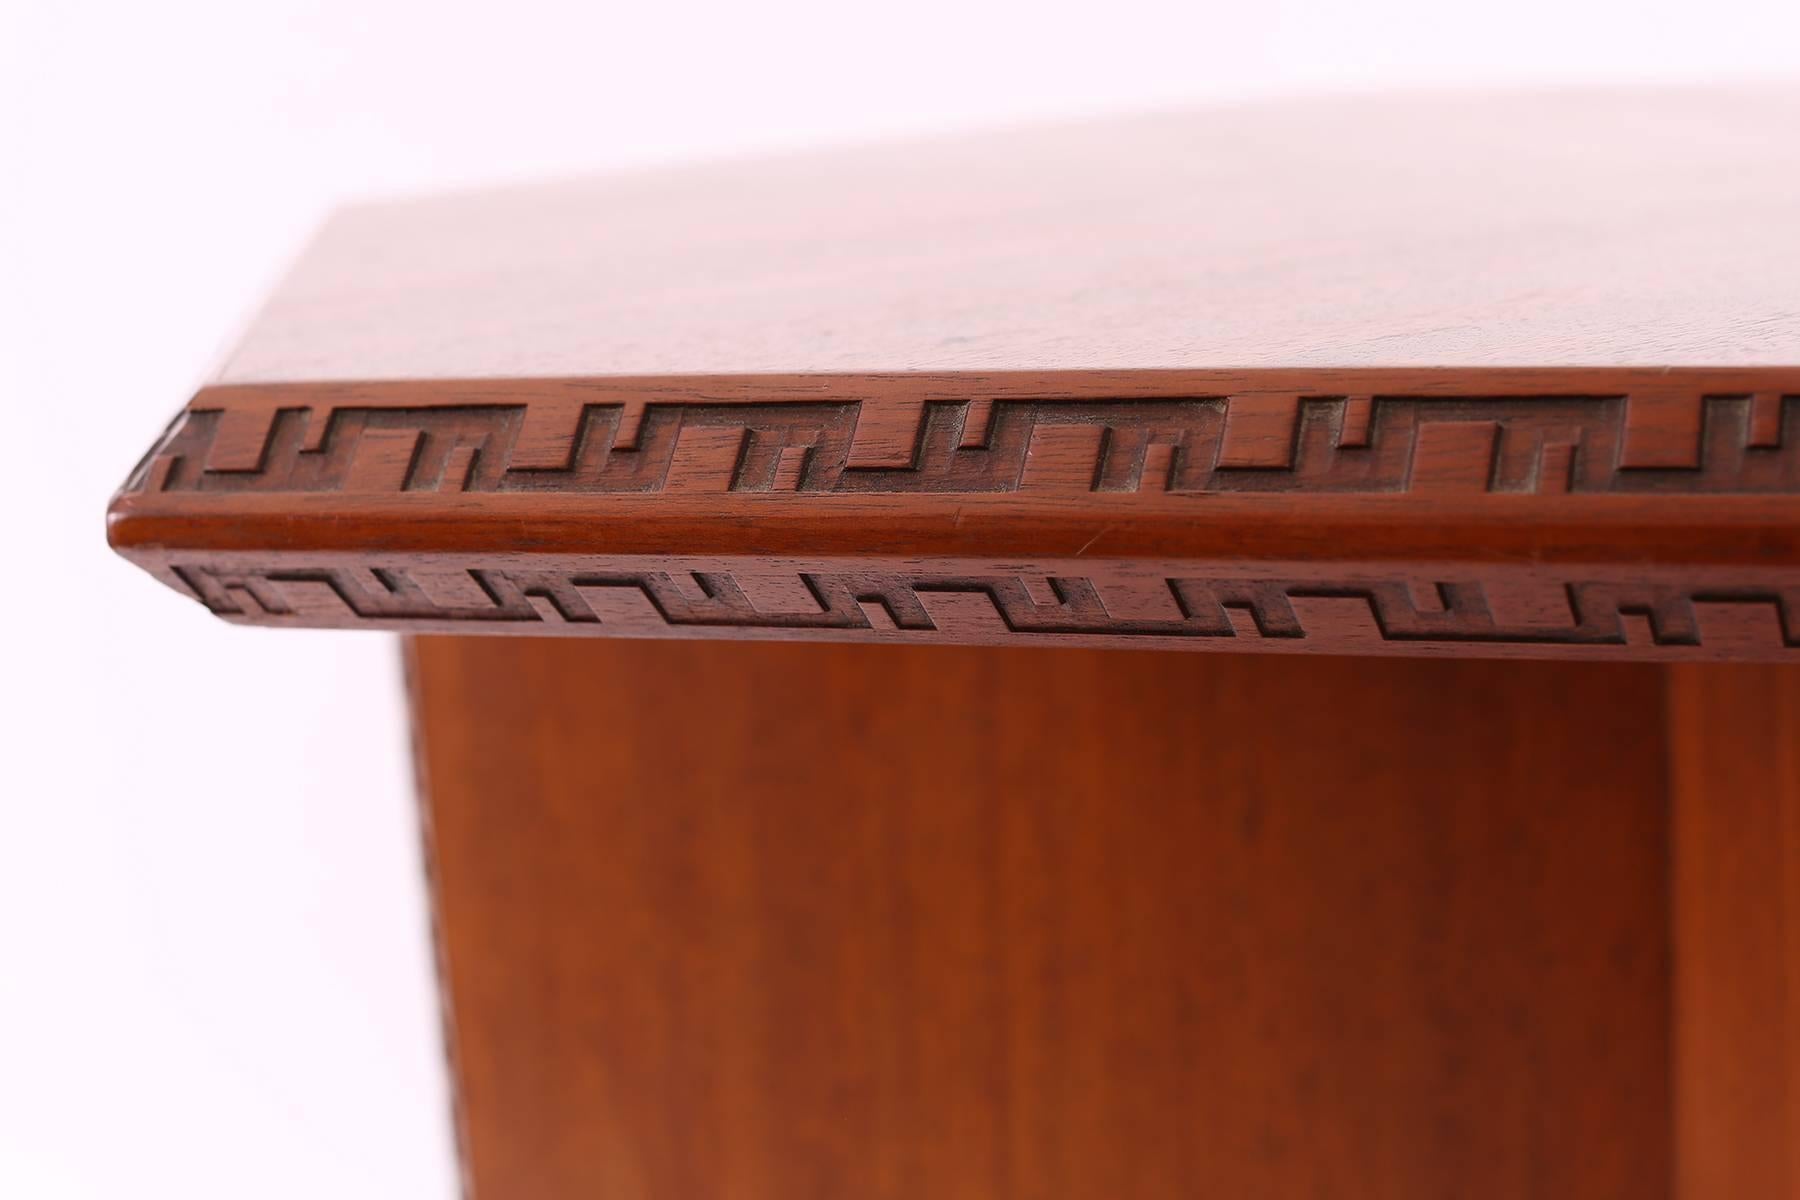 Frank Lloyd Wright for Henredon occasional table circa late 1950s. This all original example from the 'Taliesin' line has the iconic carving in the edging and is executed in beautifully grained striped African mahogany.